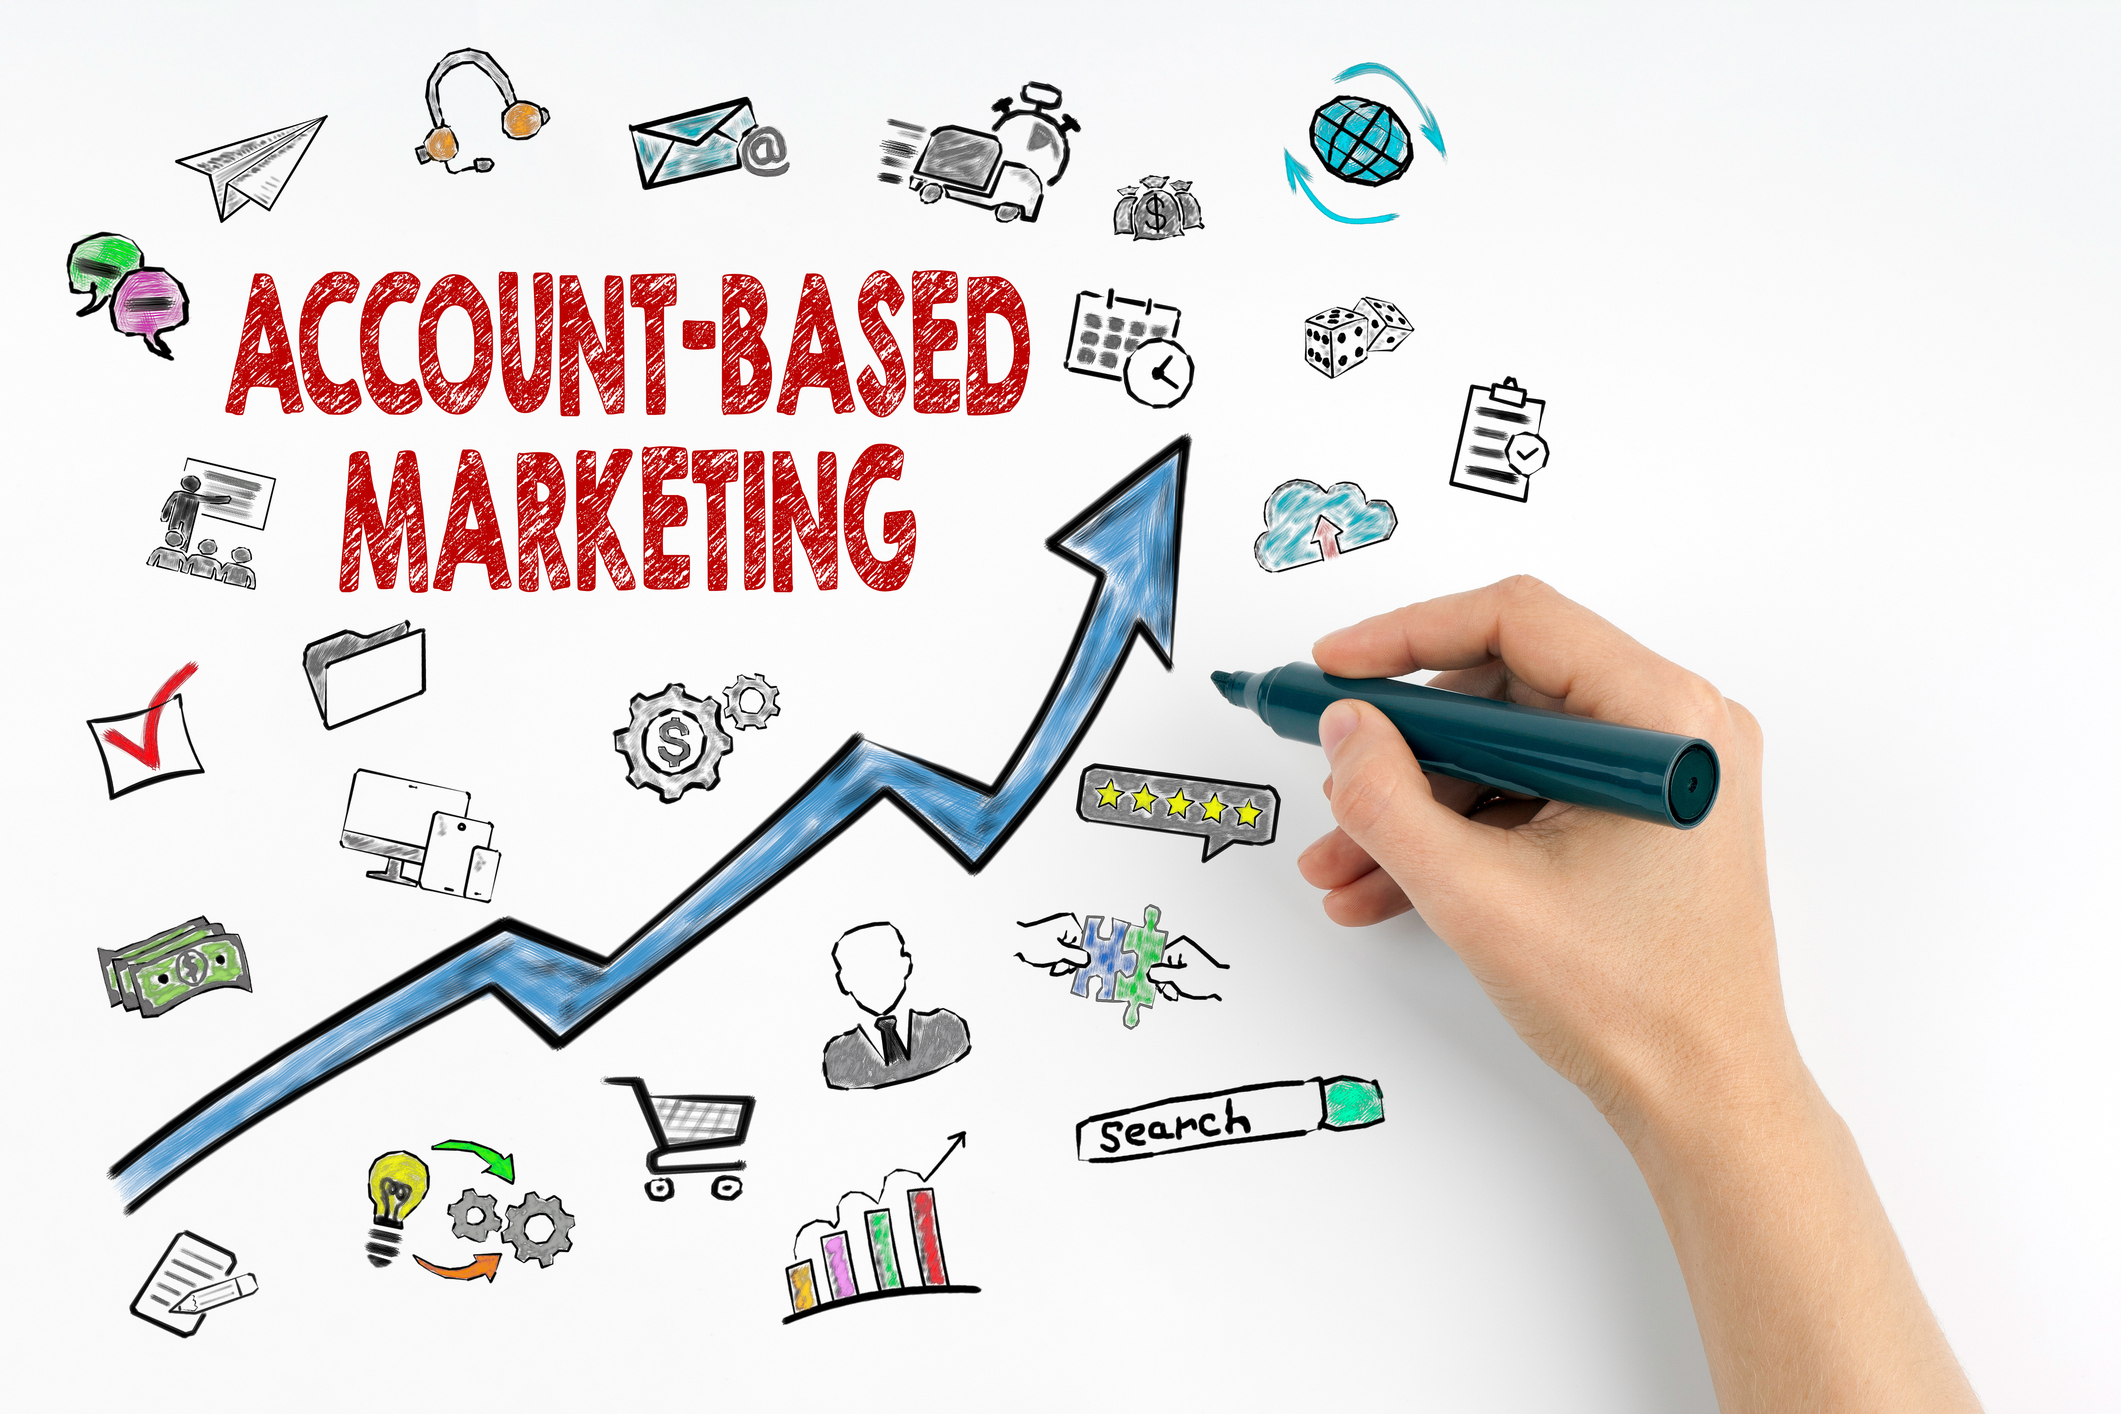 Account-Based Marketing done right